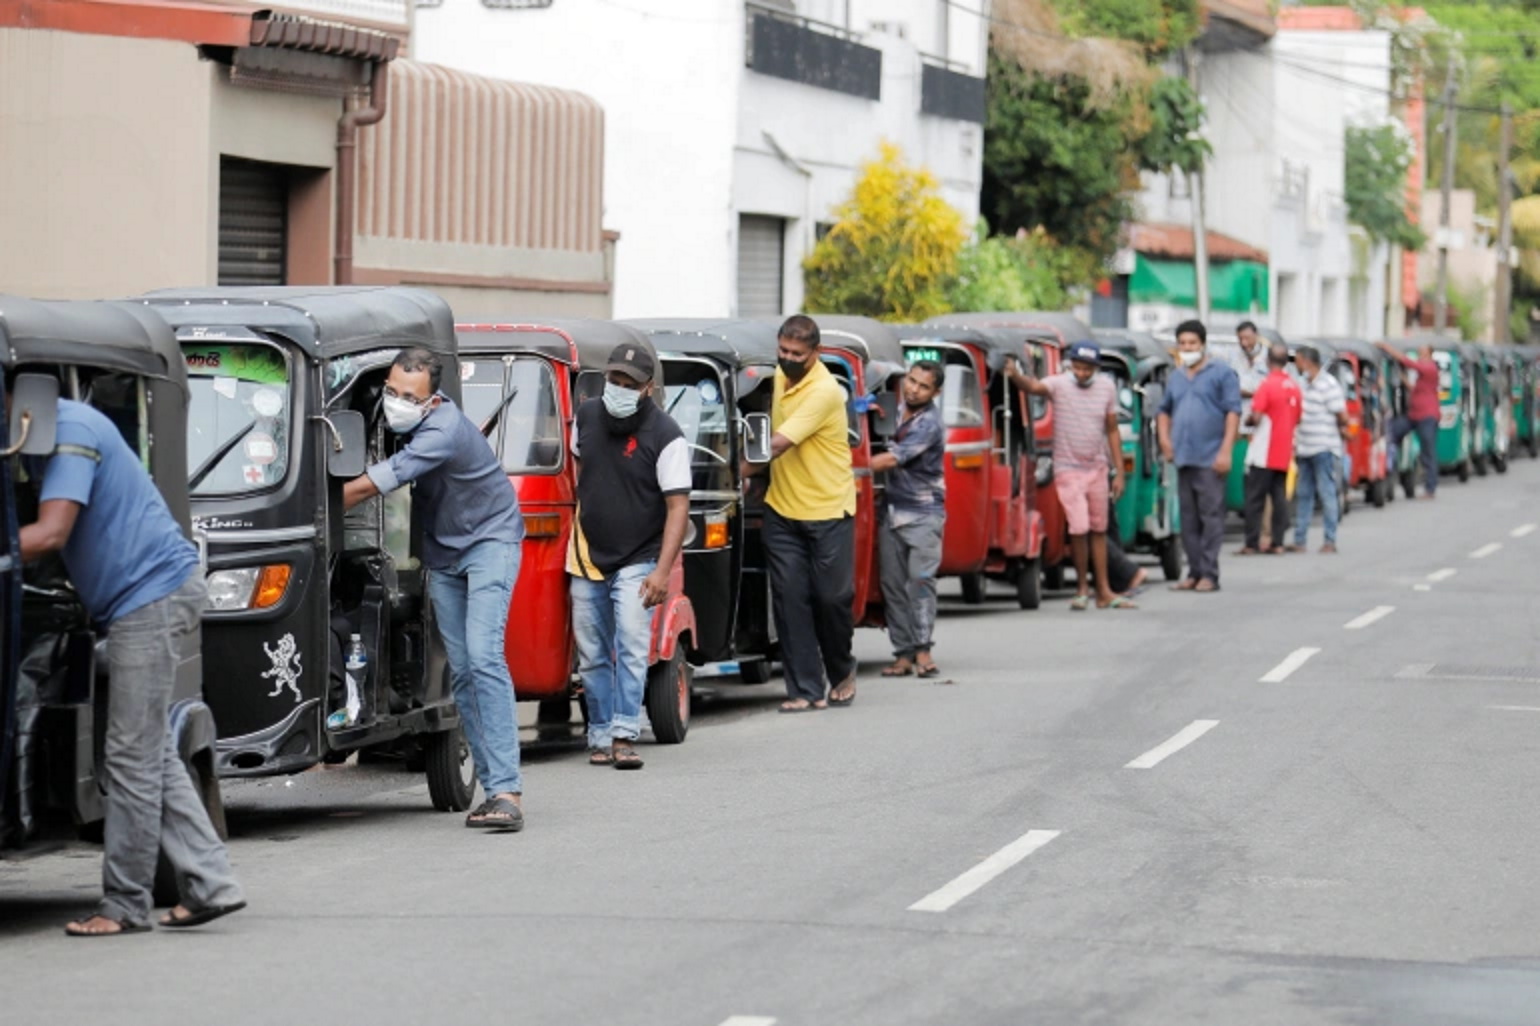 Drivers push their three-wheelers while waiting in line to buy petrol at a Ceypetco fuel station, amid the country's economic crisis, in Colombo, Sri Lanka, 12 April 2022. Photo: Dinuka Liyanawatte / REUTERS